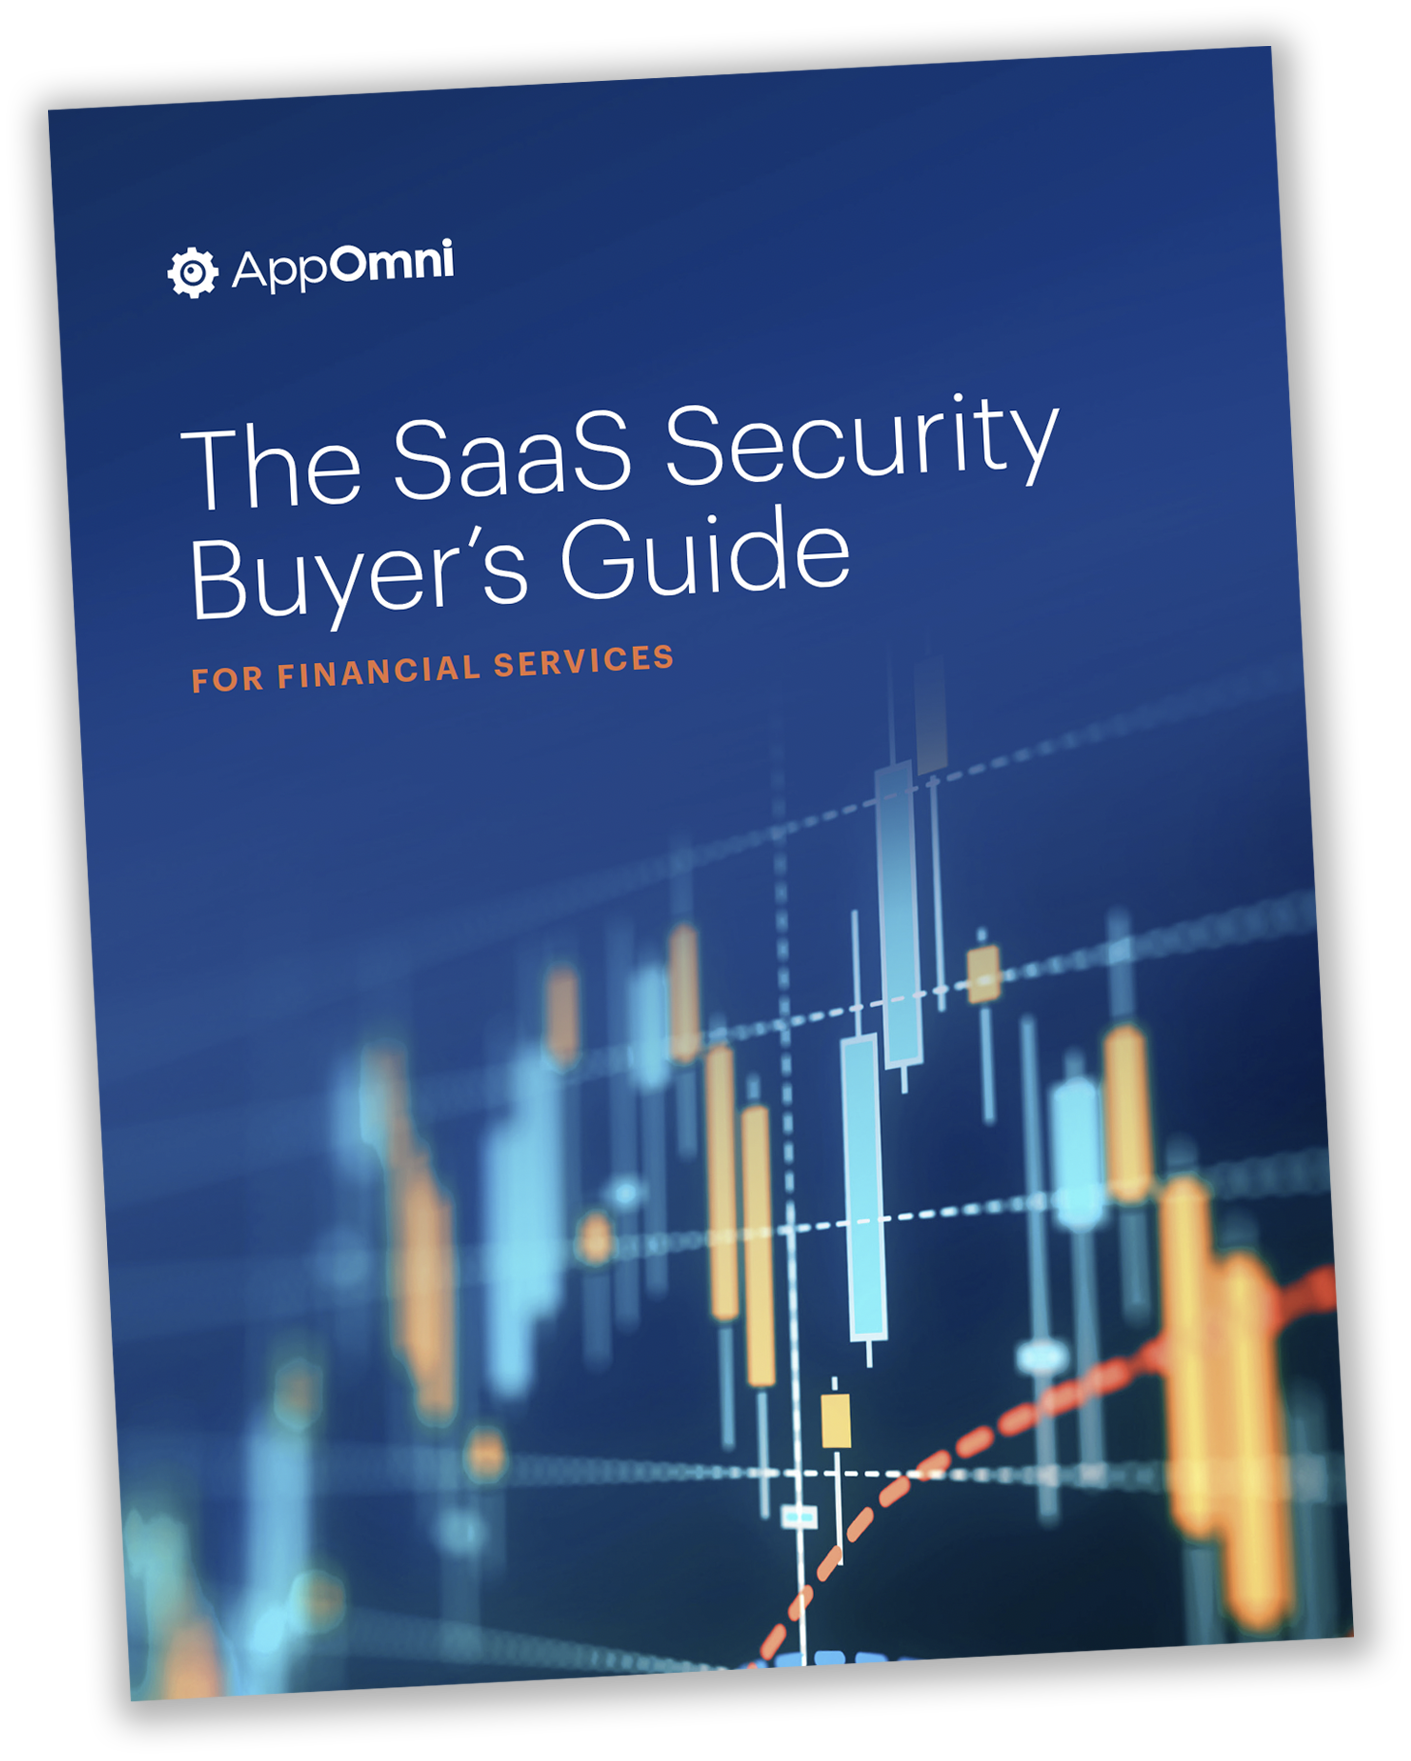 The SaaS Security Buyer’s Guide for Financial Services